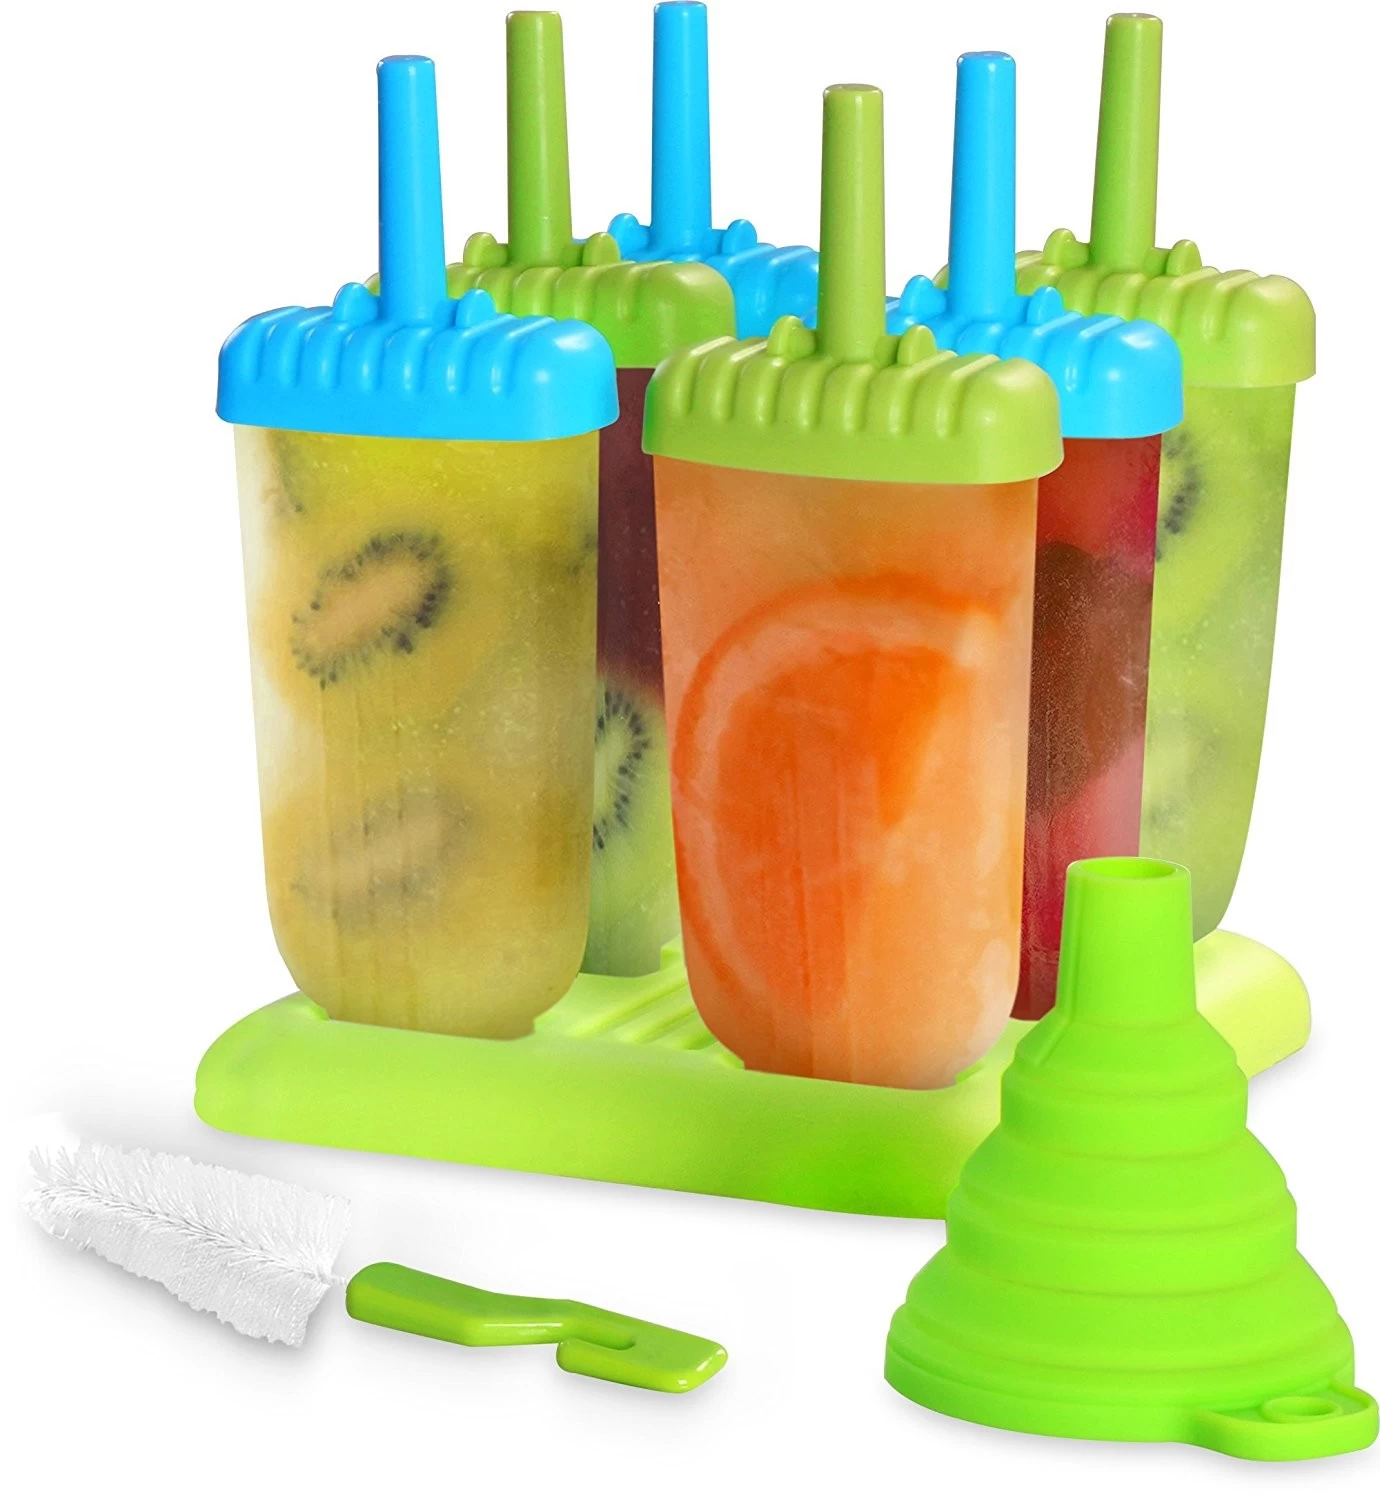 Set of 6 Ice Pop Maker,DIY Ice Cream Popsicle Molds with Sticks, Plastic PP Reusable Homemade Tools